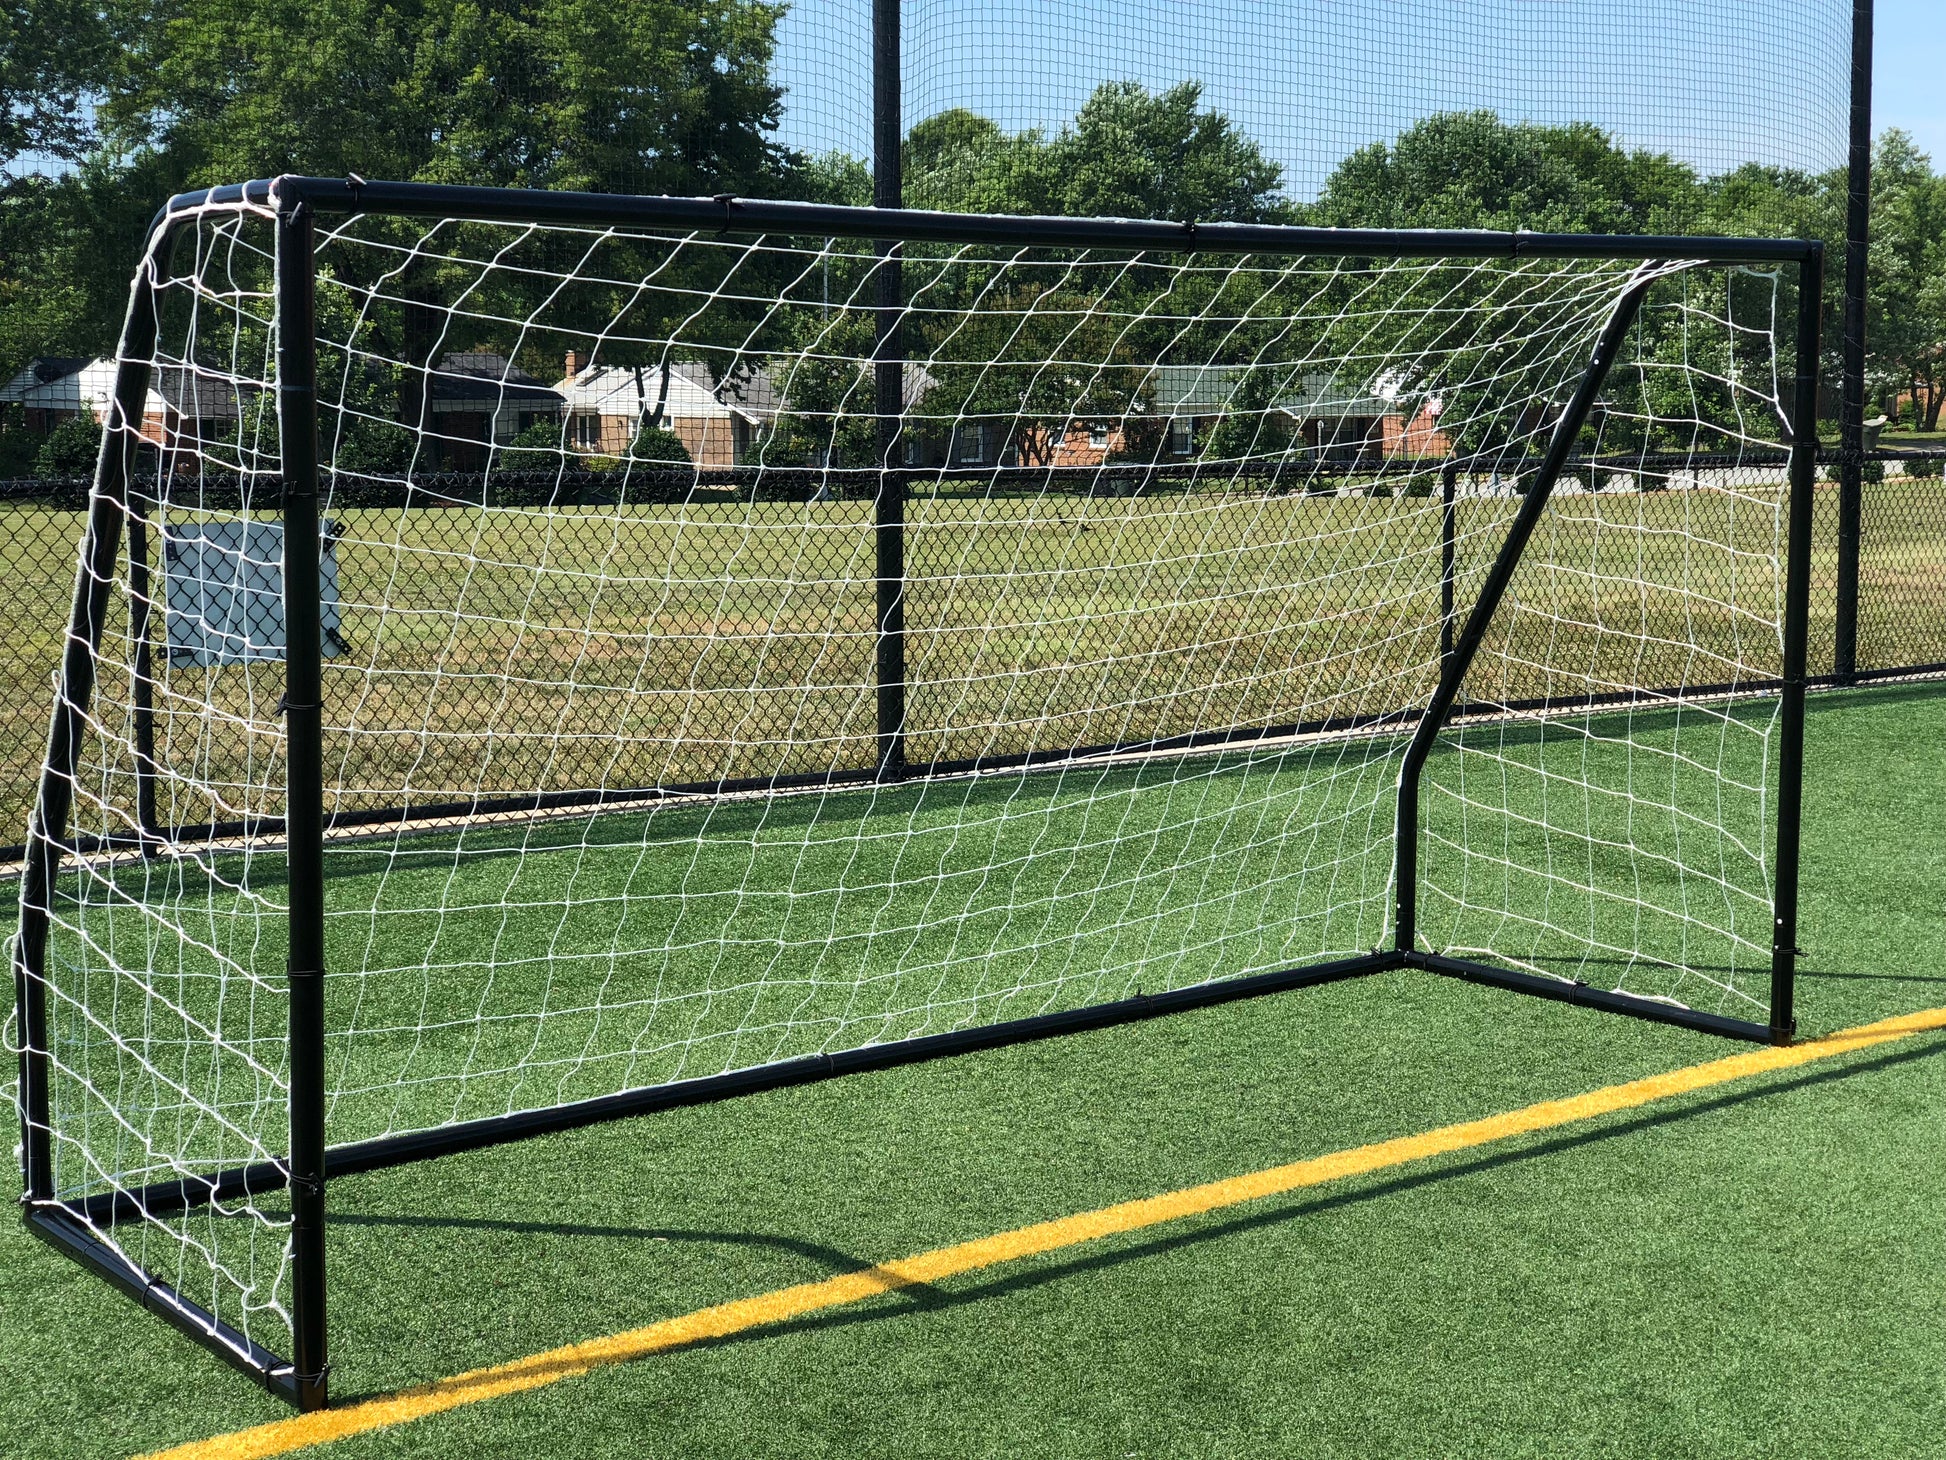 12 x 6' Premier Soccer Goal Weather-resistant Net Powder Coated Play Beach